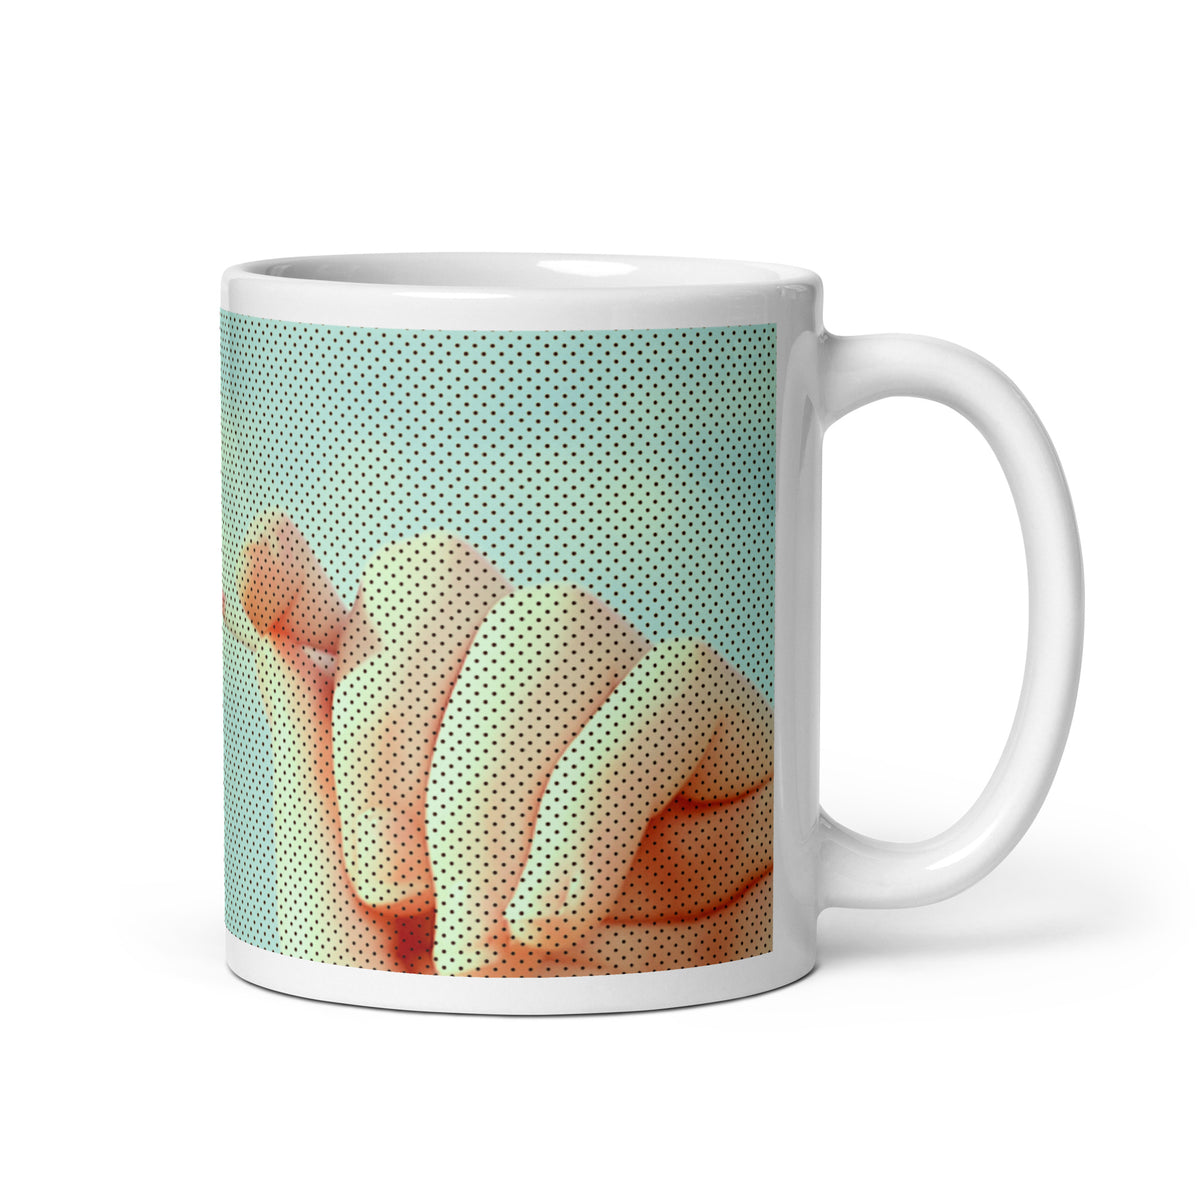 coffee mug with image of a girl with a red lolly pop in a pop art style